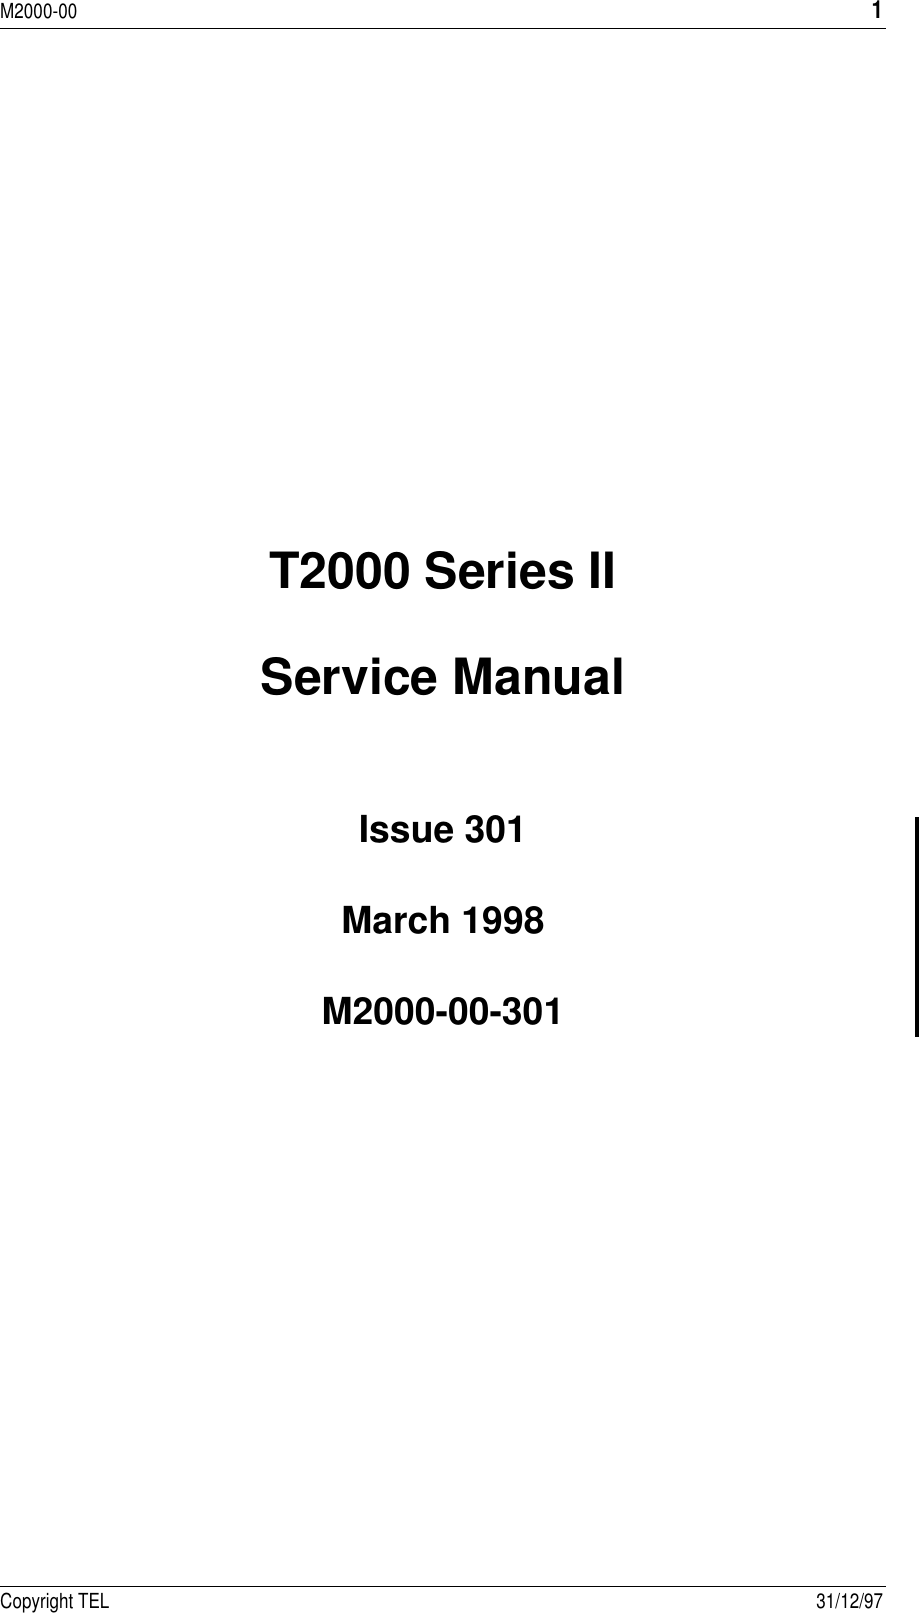 M2000-001Copyright TEL 31/12/97T2000 Series IIService ManualIssue 301March 1998M2000-00-301